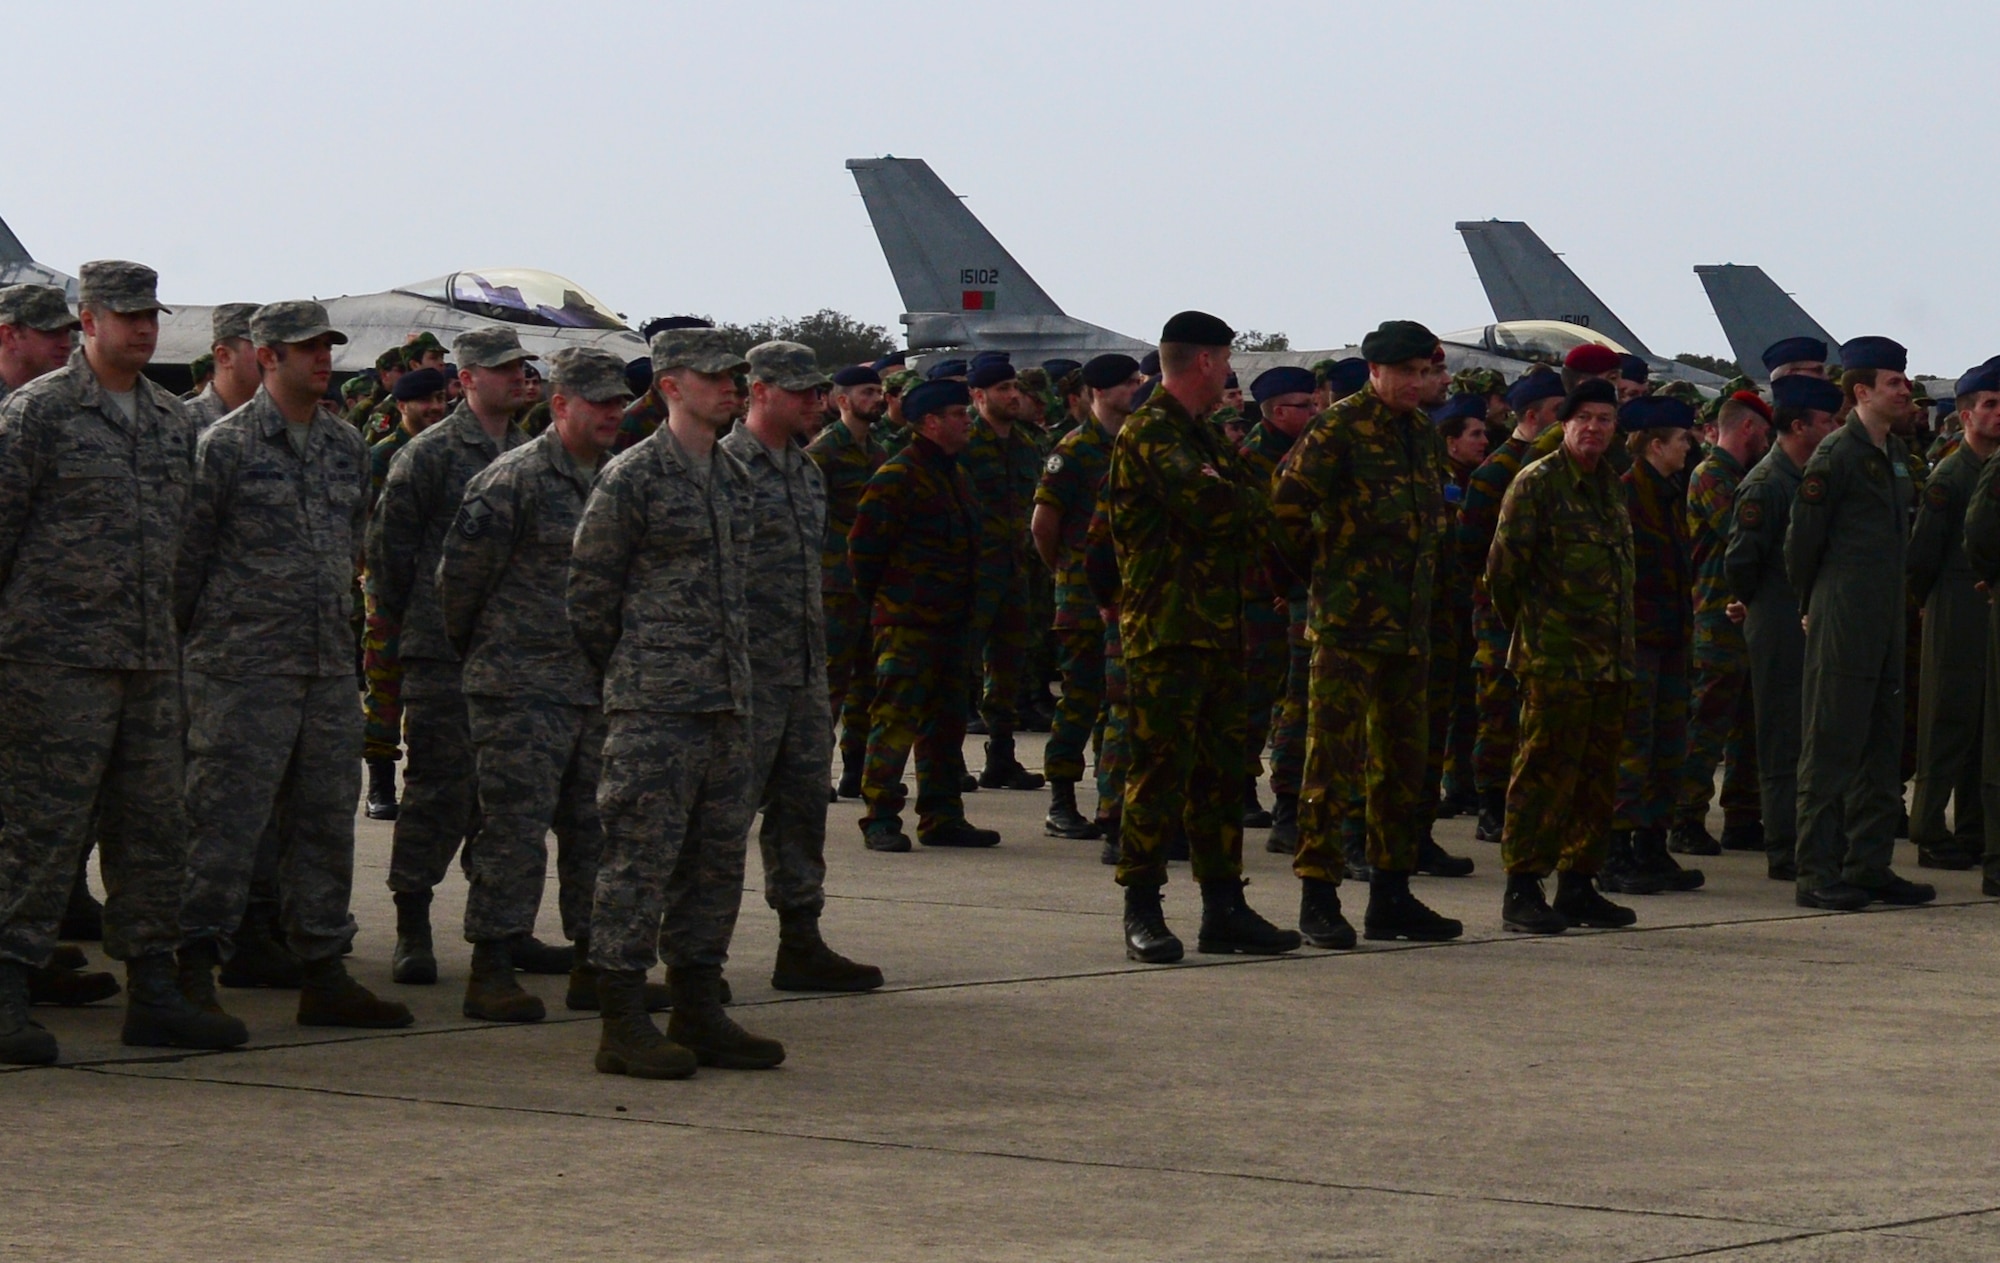 Airmen from the 48th Fighter Wing stand in formation along with Portuguese, Belgian, Danish French, Dutch, Norwegian, Spanish and other NATO ally forces during the opening ceremony for Real Thaw 2016 at Beja Air Base, Portugal, Feb. 21, 2016. Participating in exercises like RT16 are an important component to remaining “Forward, Ready, Now,” for the 48th FW. RT16, taking place from February 22-March 3, is an exercise planned and conducted by the Portuguese air force, under the aegis of its Air Command, who are responsible for training and readying the operational units, through air operations in the defense of national interests, as well as through the participation in military operations in several international cooperation frameworks.  (U.S. Air Force photo by Senior Airman Dawn M. Weber/Released)